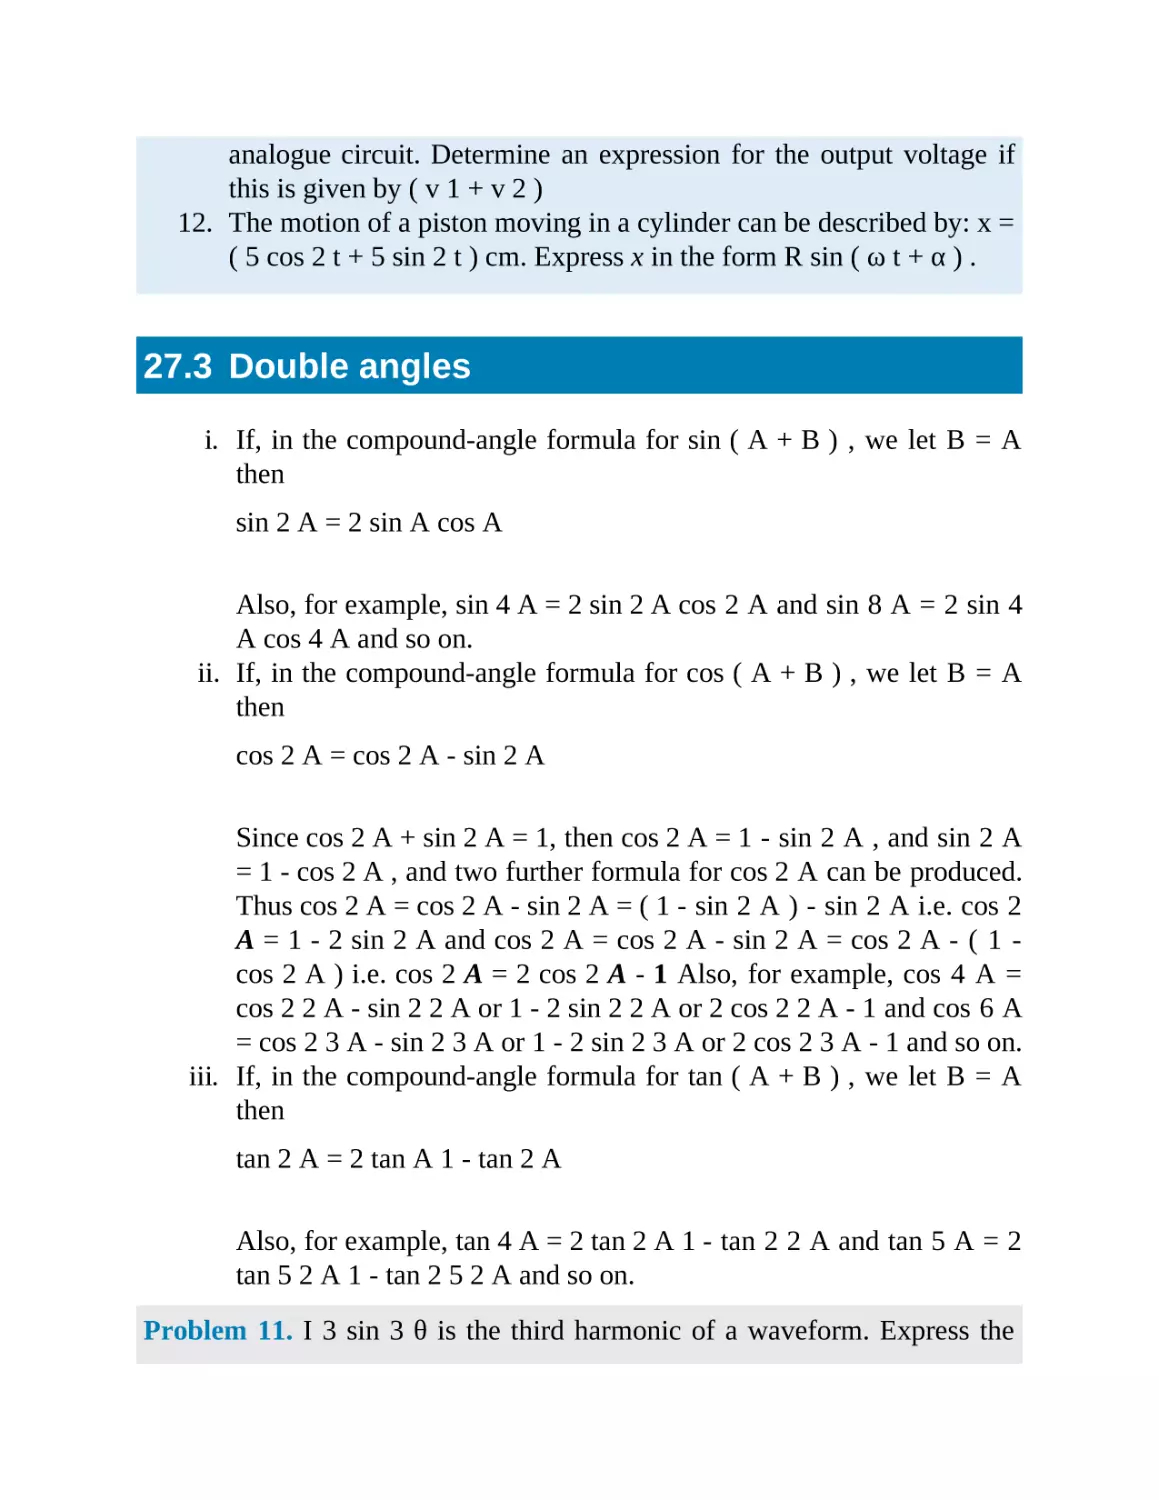 27.3 Double angles